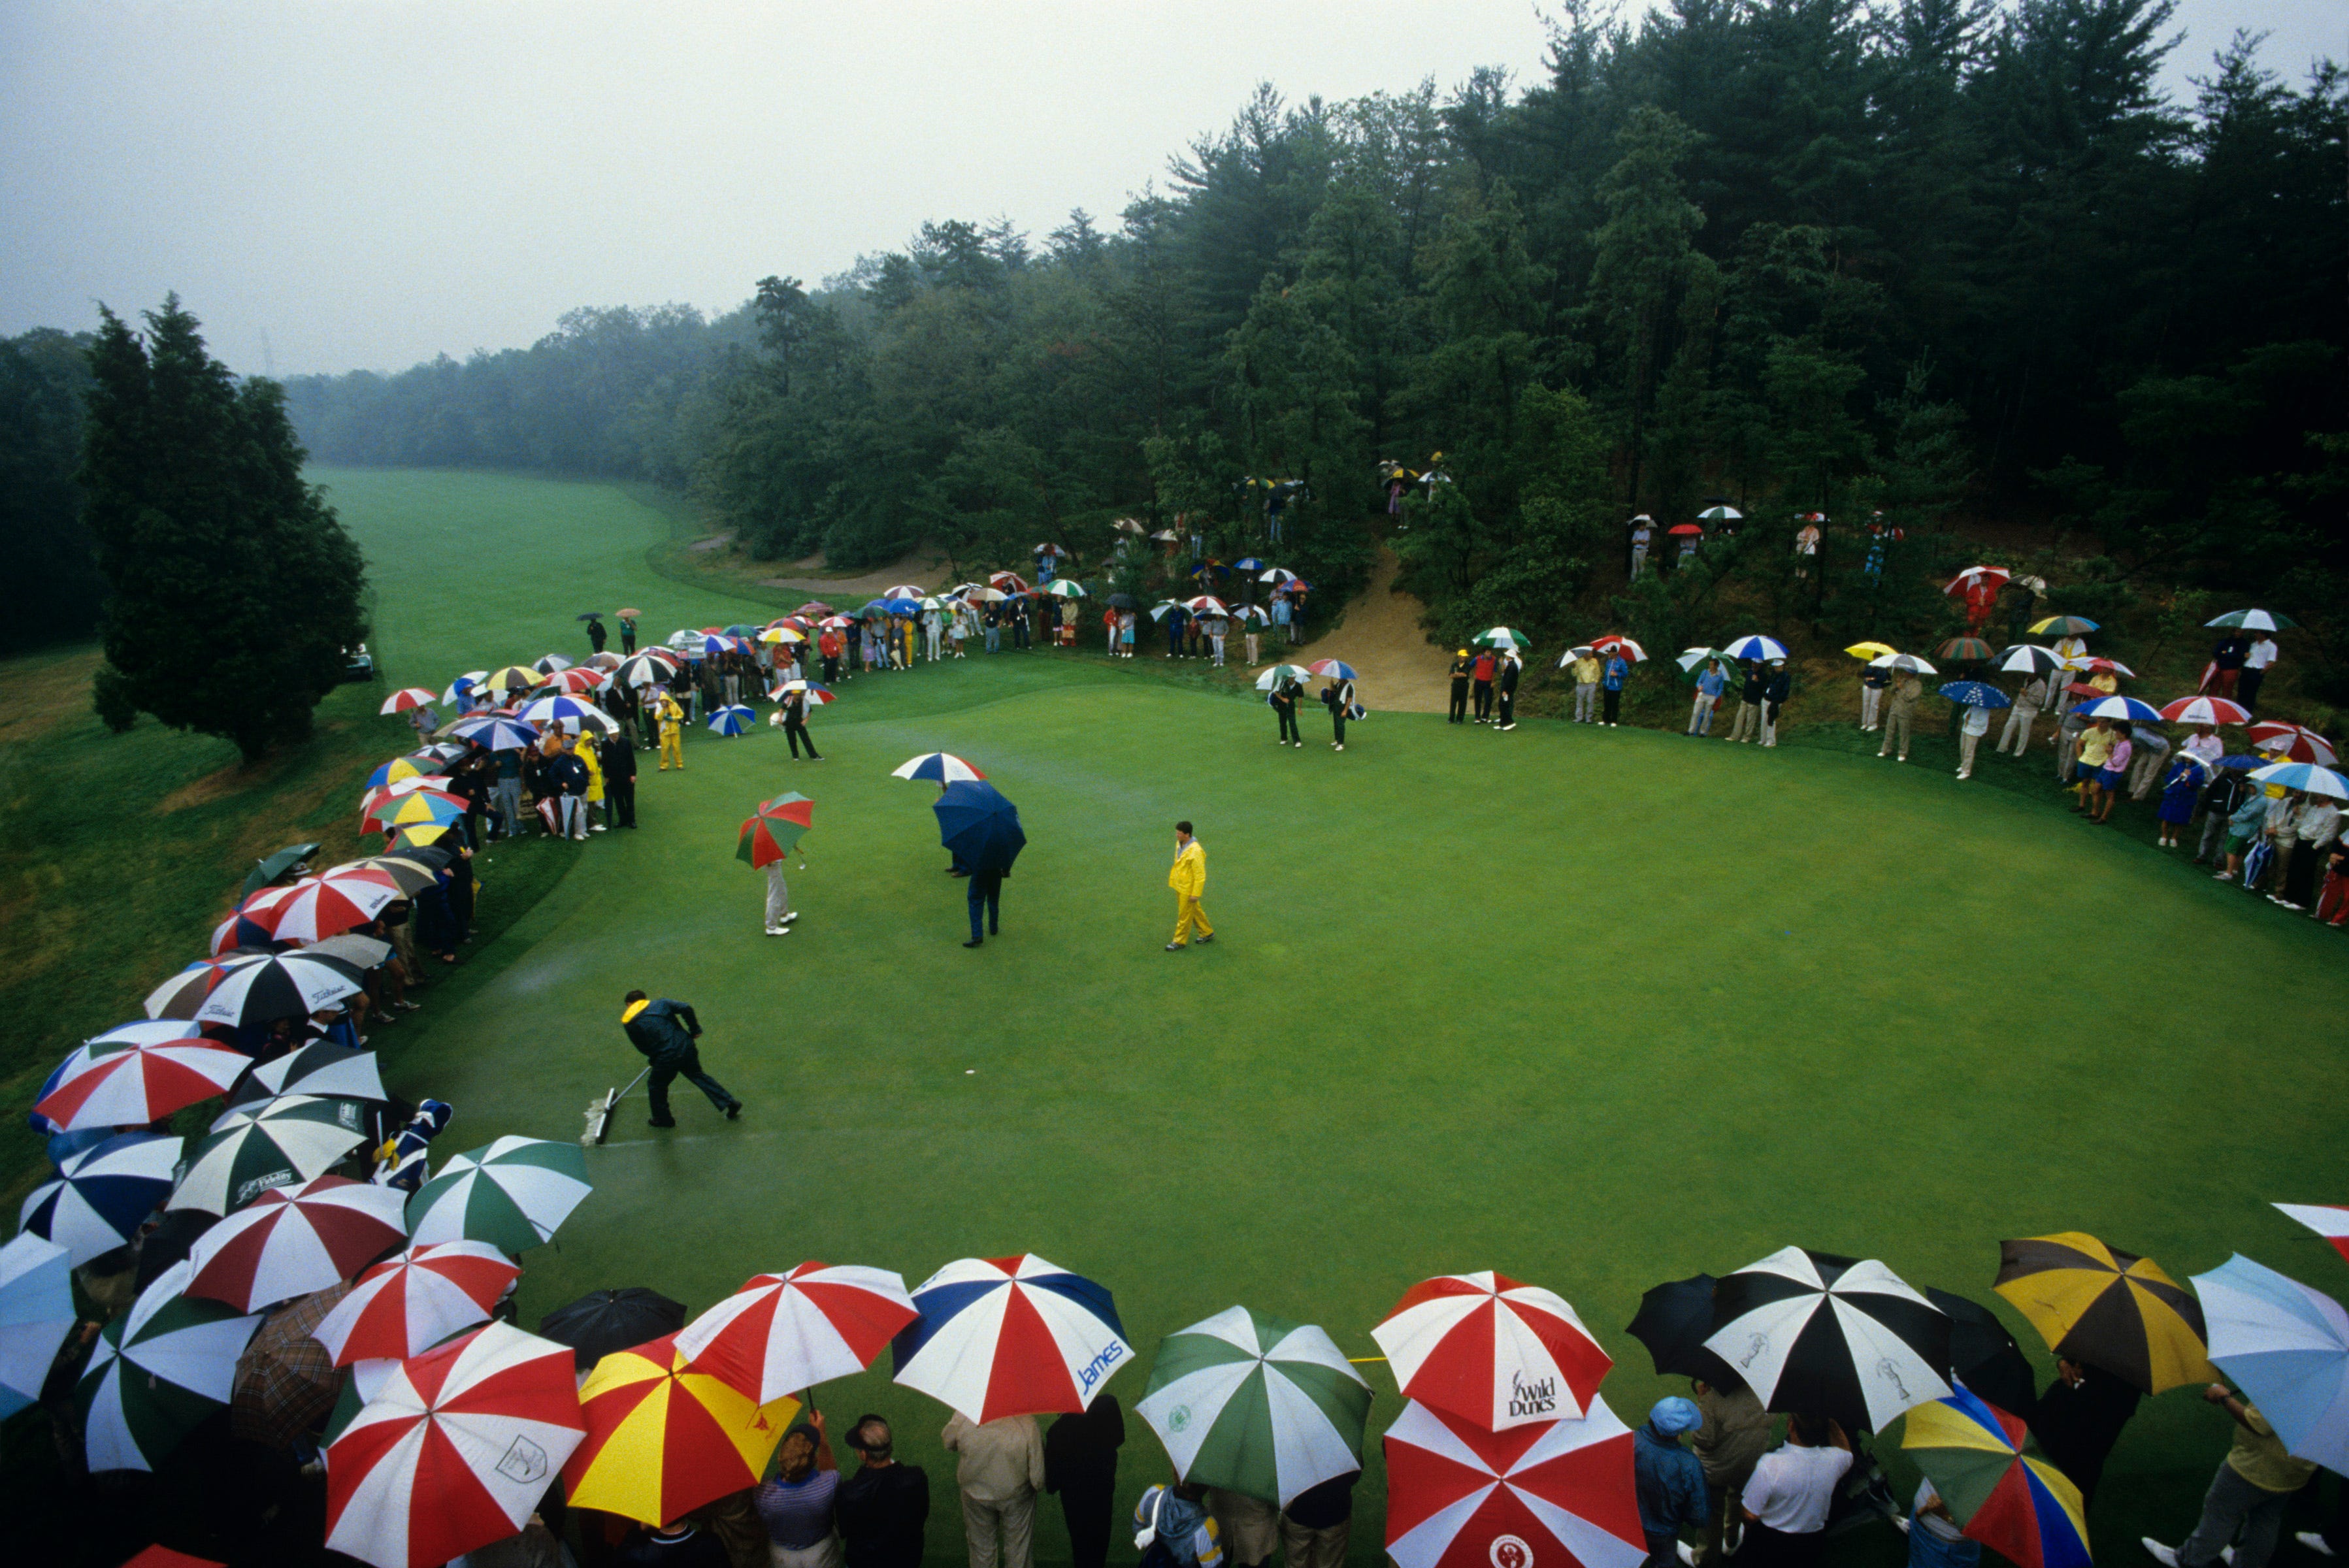 <p>Founded in 1913, Pine Valley Golf Club in New Jersey has been ranked the No. 1 golf course in the state every year since 1985 and the No. 1 golf course in the country every year since 2017, per Golf Digest.</p><p>The club is famously invite-only and, until 2021, only allowed women to play as guests on Sunday afternoons.</p><p>"The future of golf must move toward inclusion, and I am pleased to report that the Trustees and members of the Pine Valley Golf Club have voted unanimously and with enthusiasm to remove all gender-specific language from our bylaws," club president Jim Davis wrote in an email to members obtained by Golf Digest in 2021.</p><p>Pine Valley has only held one elite professional event in its history, further emphasizing its interest in privacy. However, the club will break tradition in 2034 to host the Curtis Cup, a biennial match where the top female American amateurs compete against the best from Great Britain and Ireland.</p>